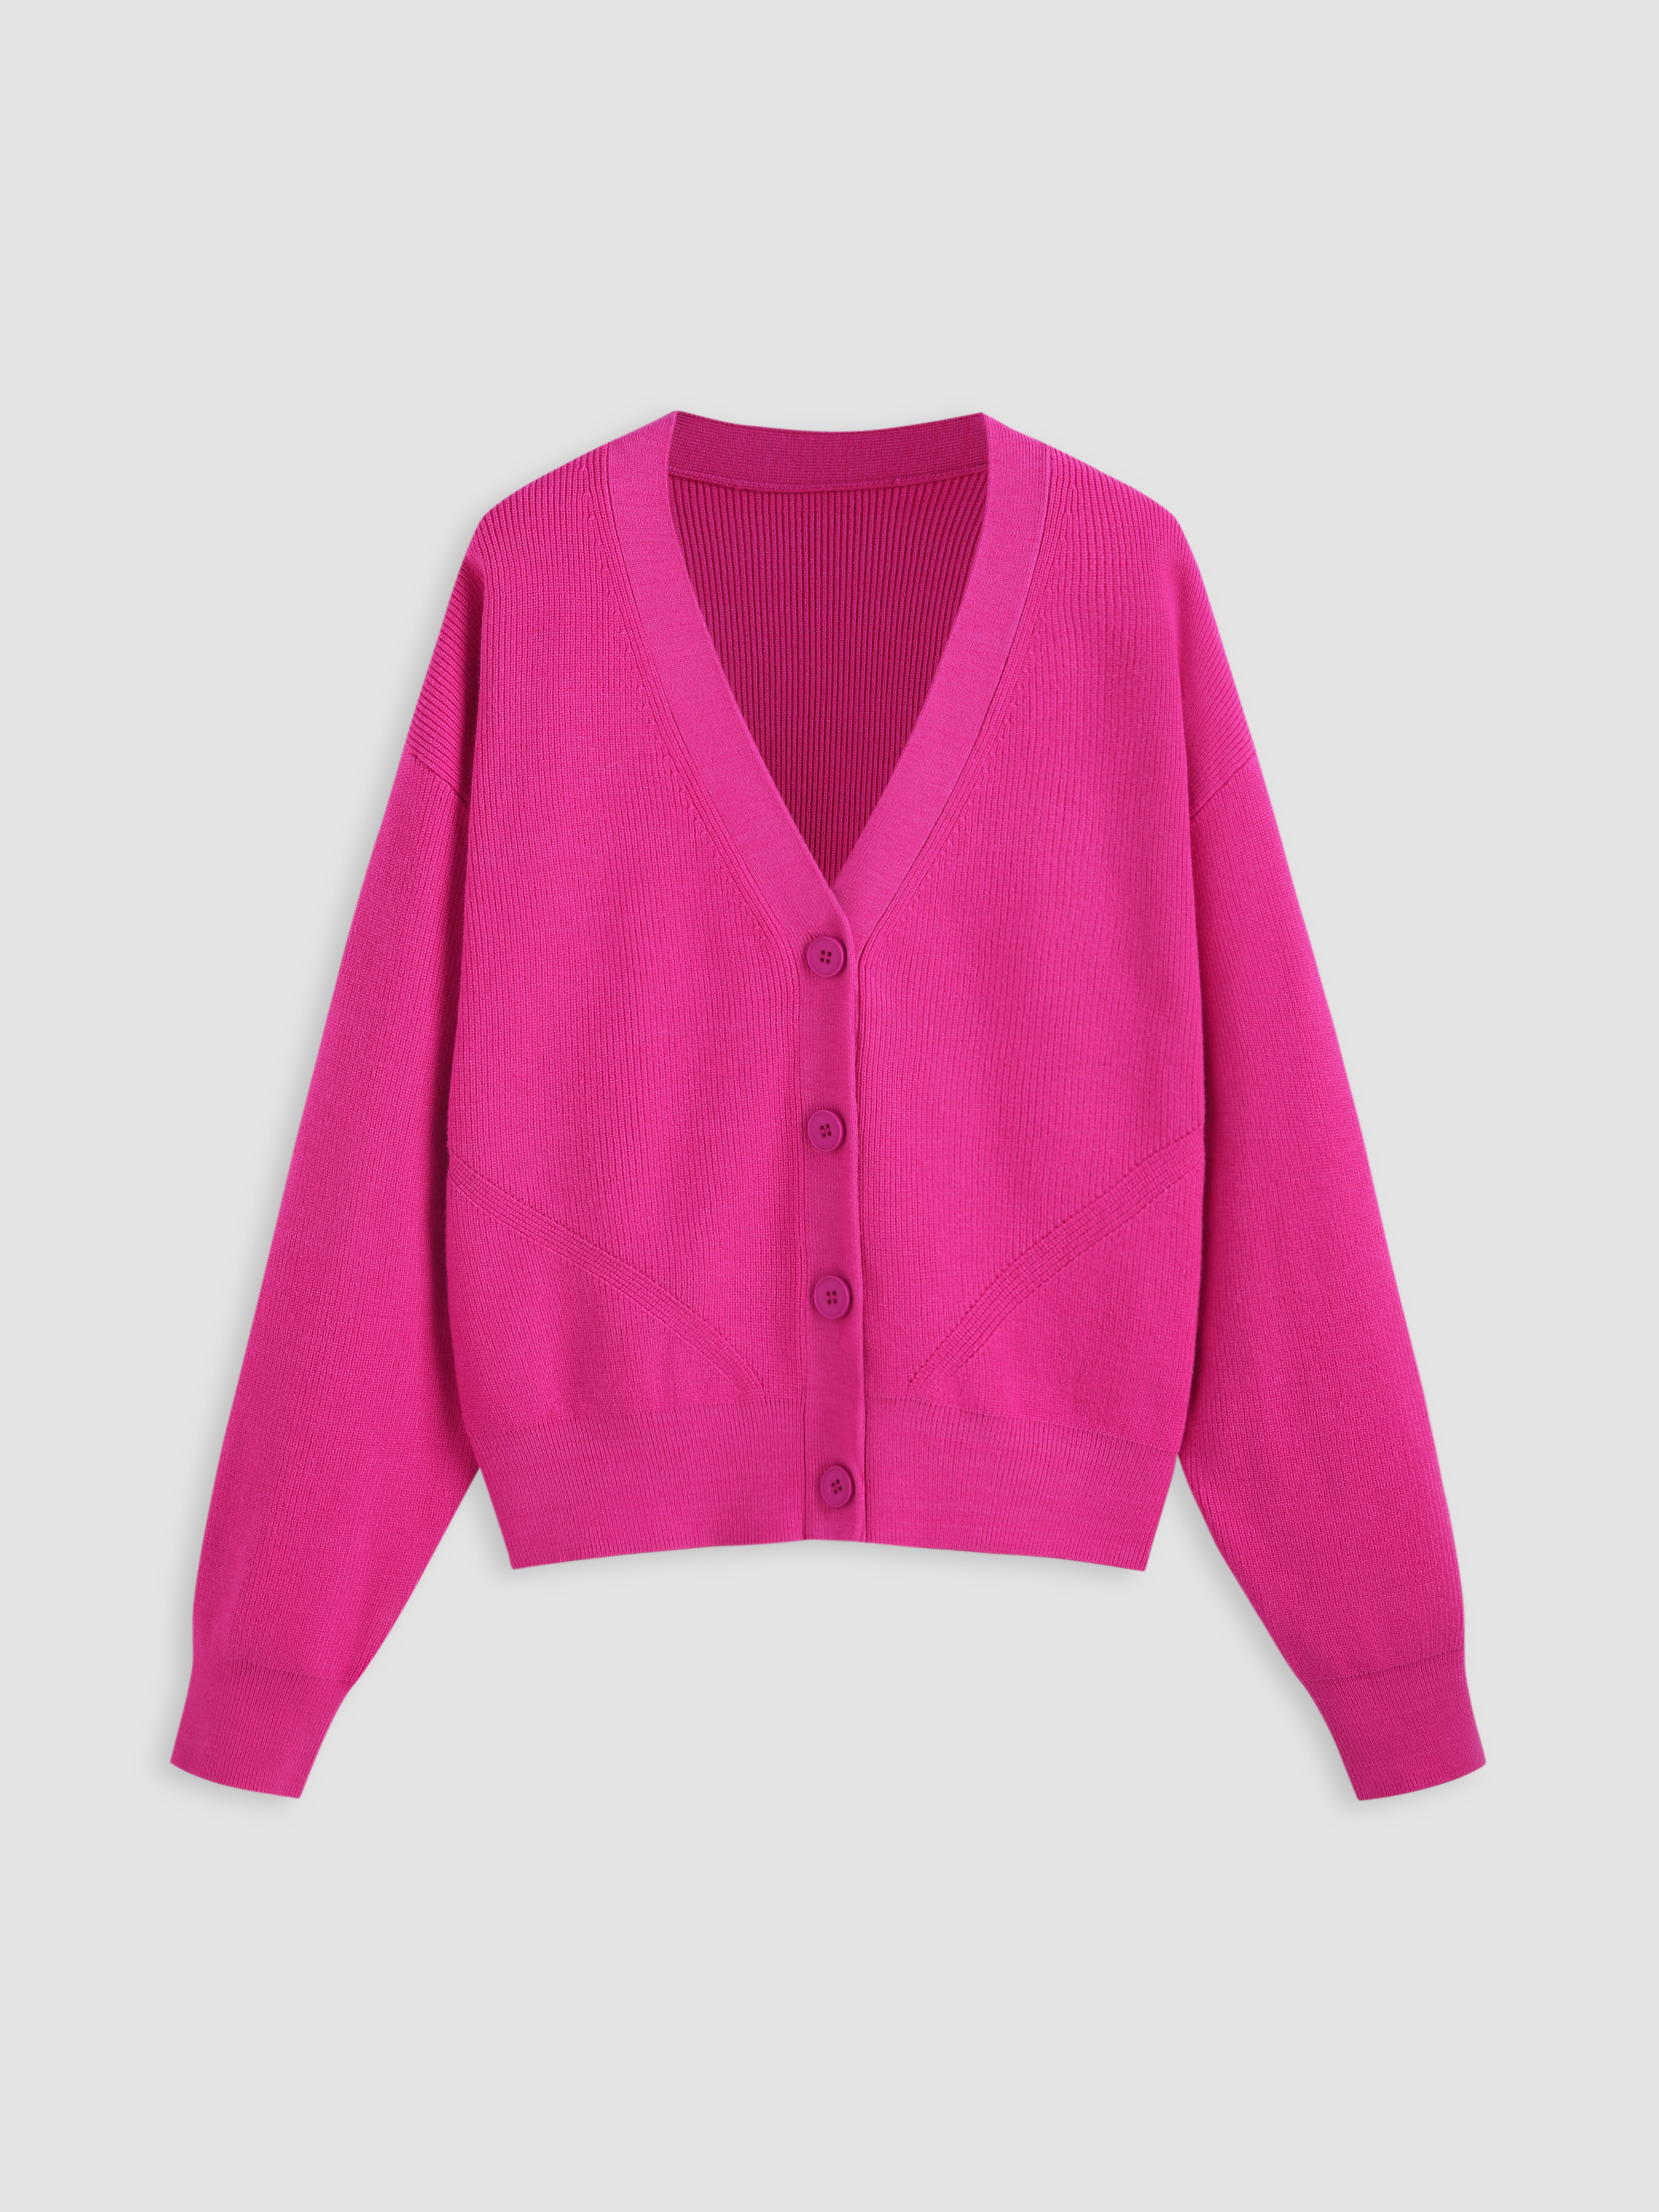 Women's Cardigans & Sweaters - Cider